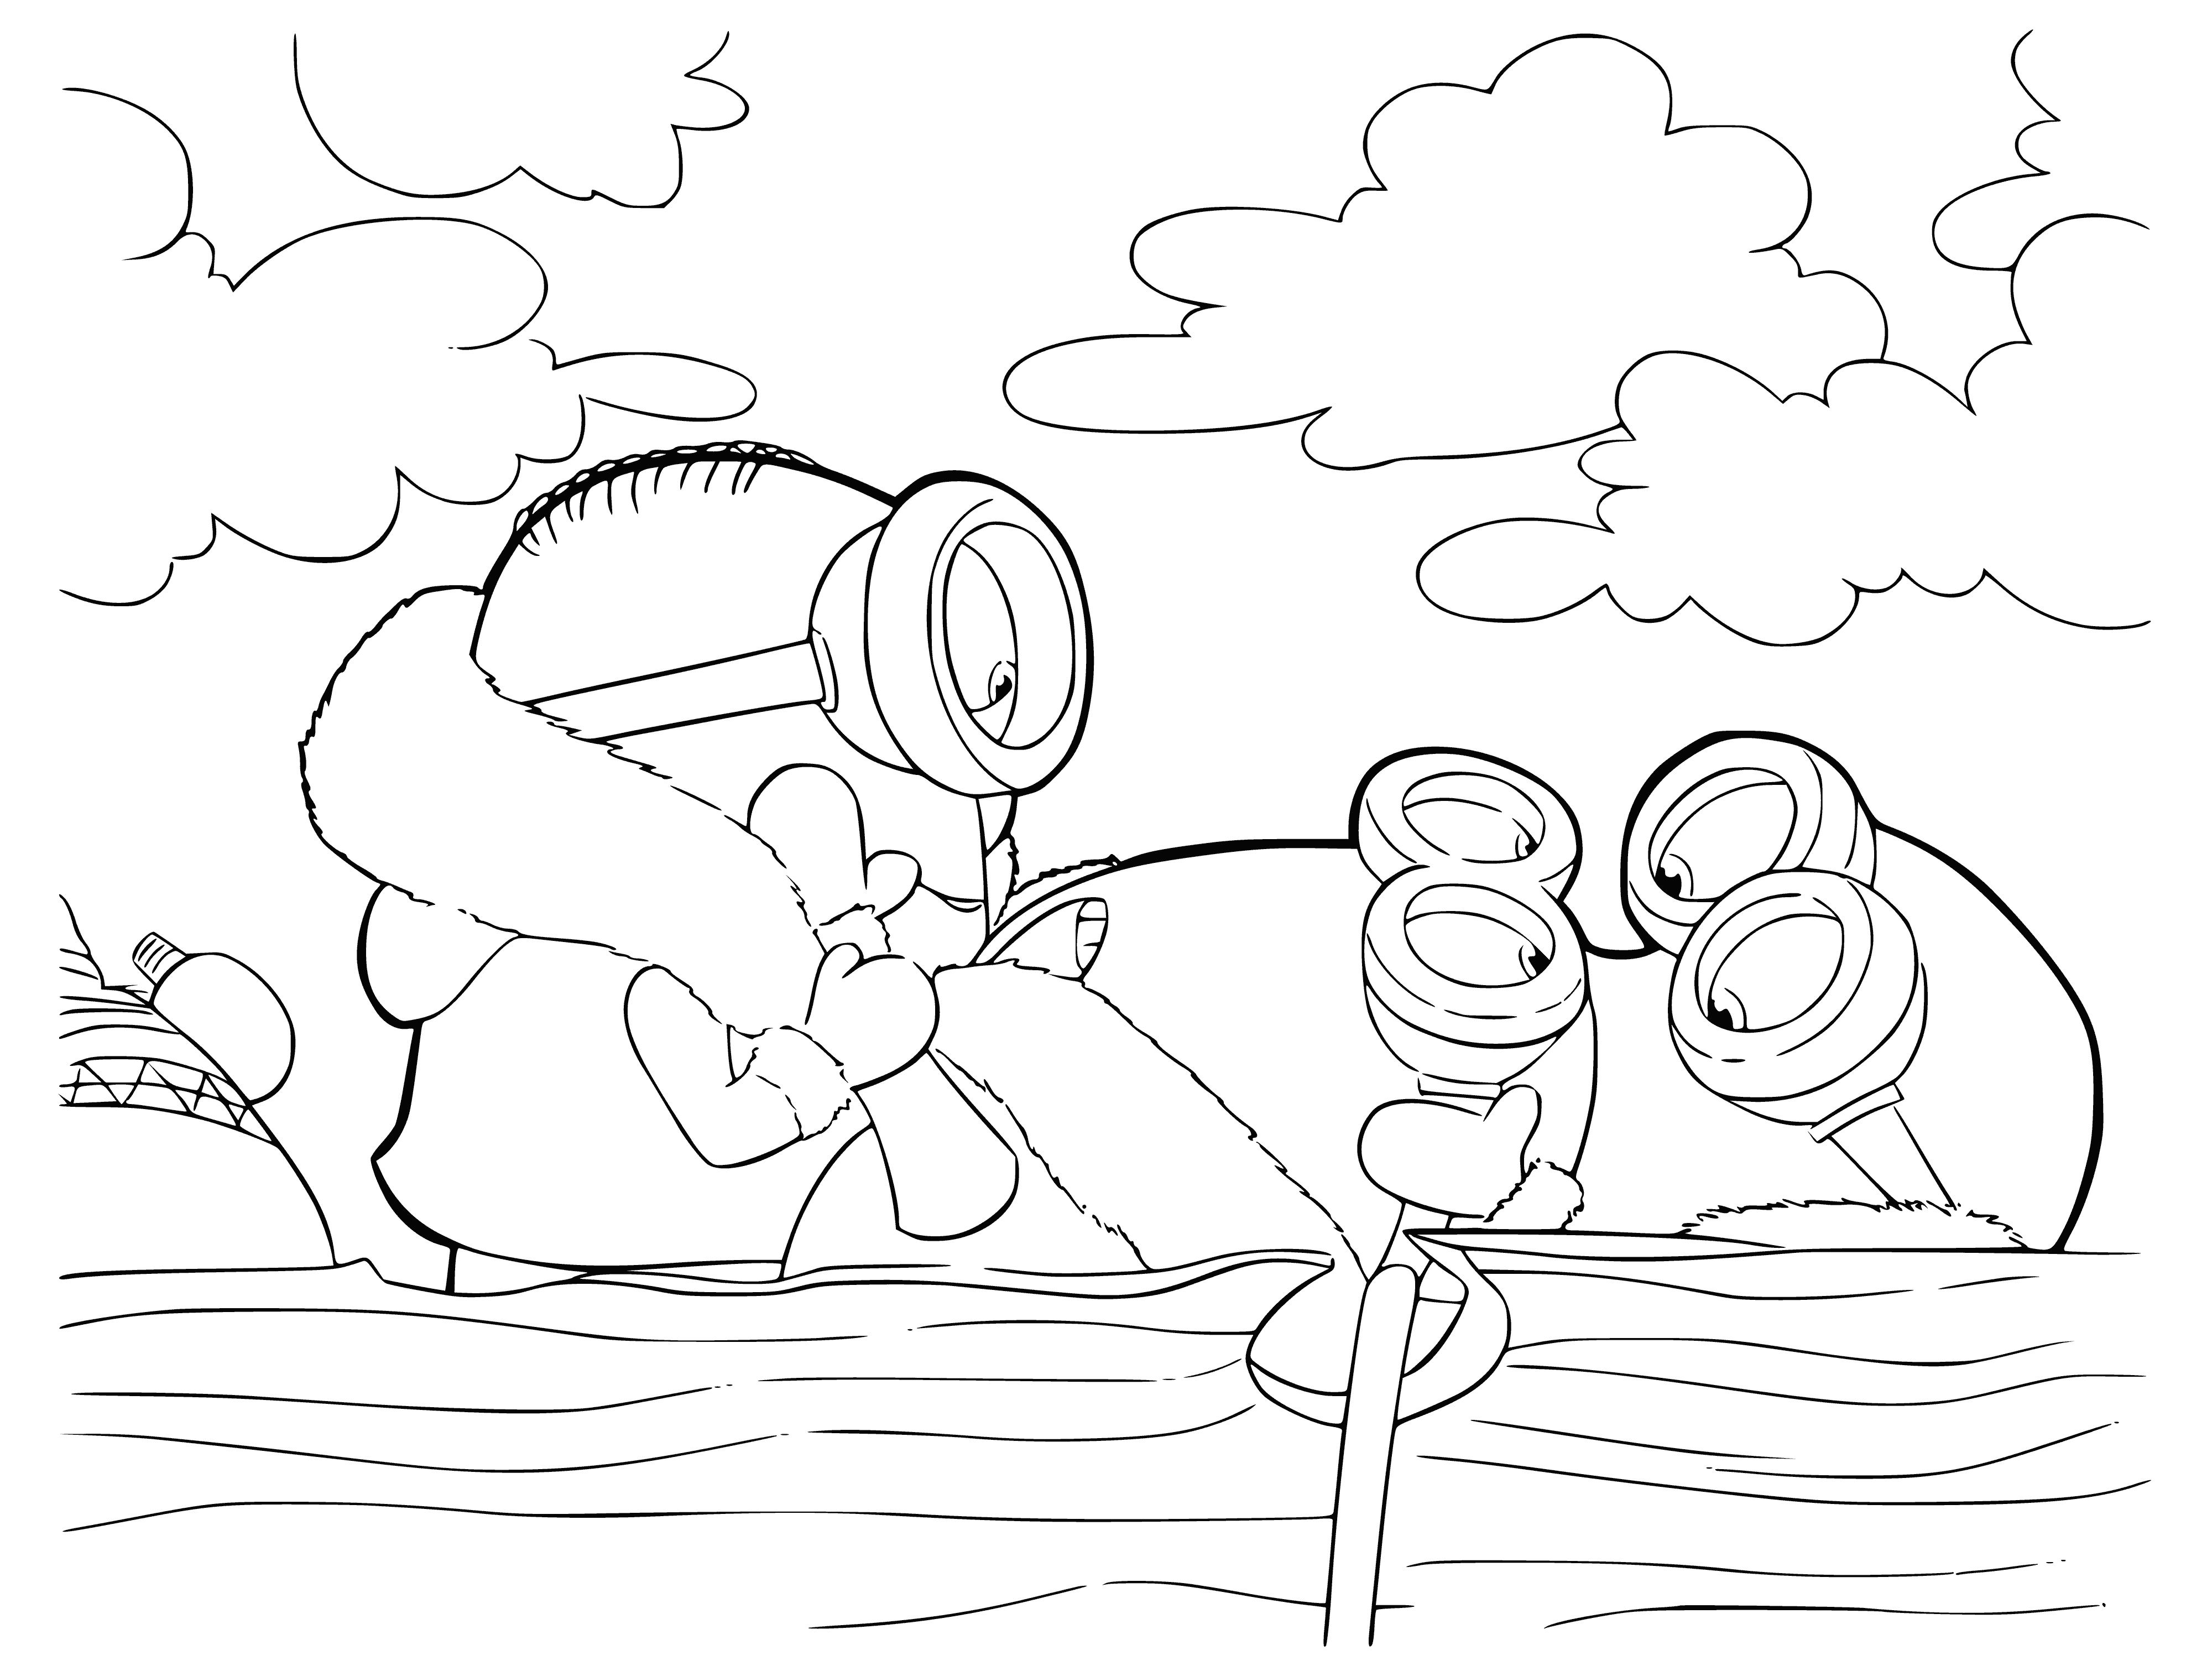 coloring page: Three Minions wearing warm clothes explore the chilly north, snowboarding and throwing snowballs. They look happy and excited!